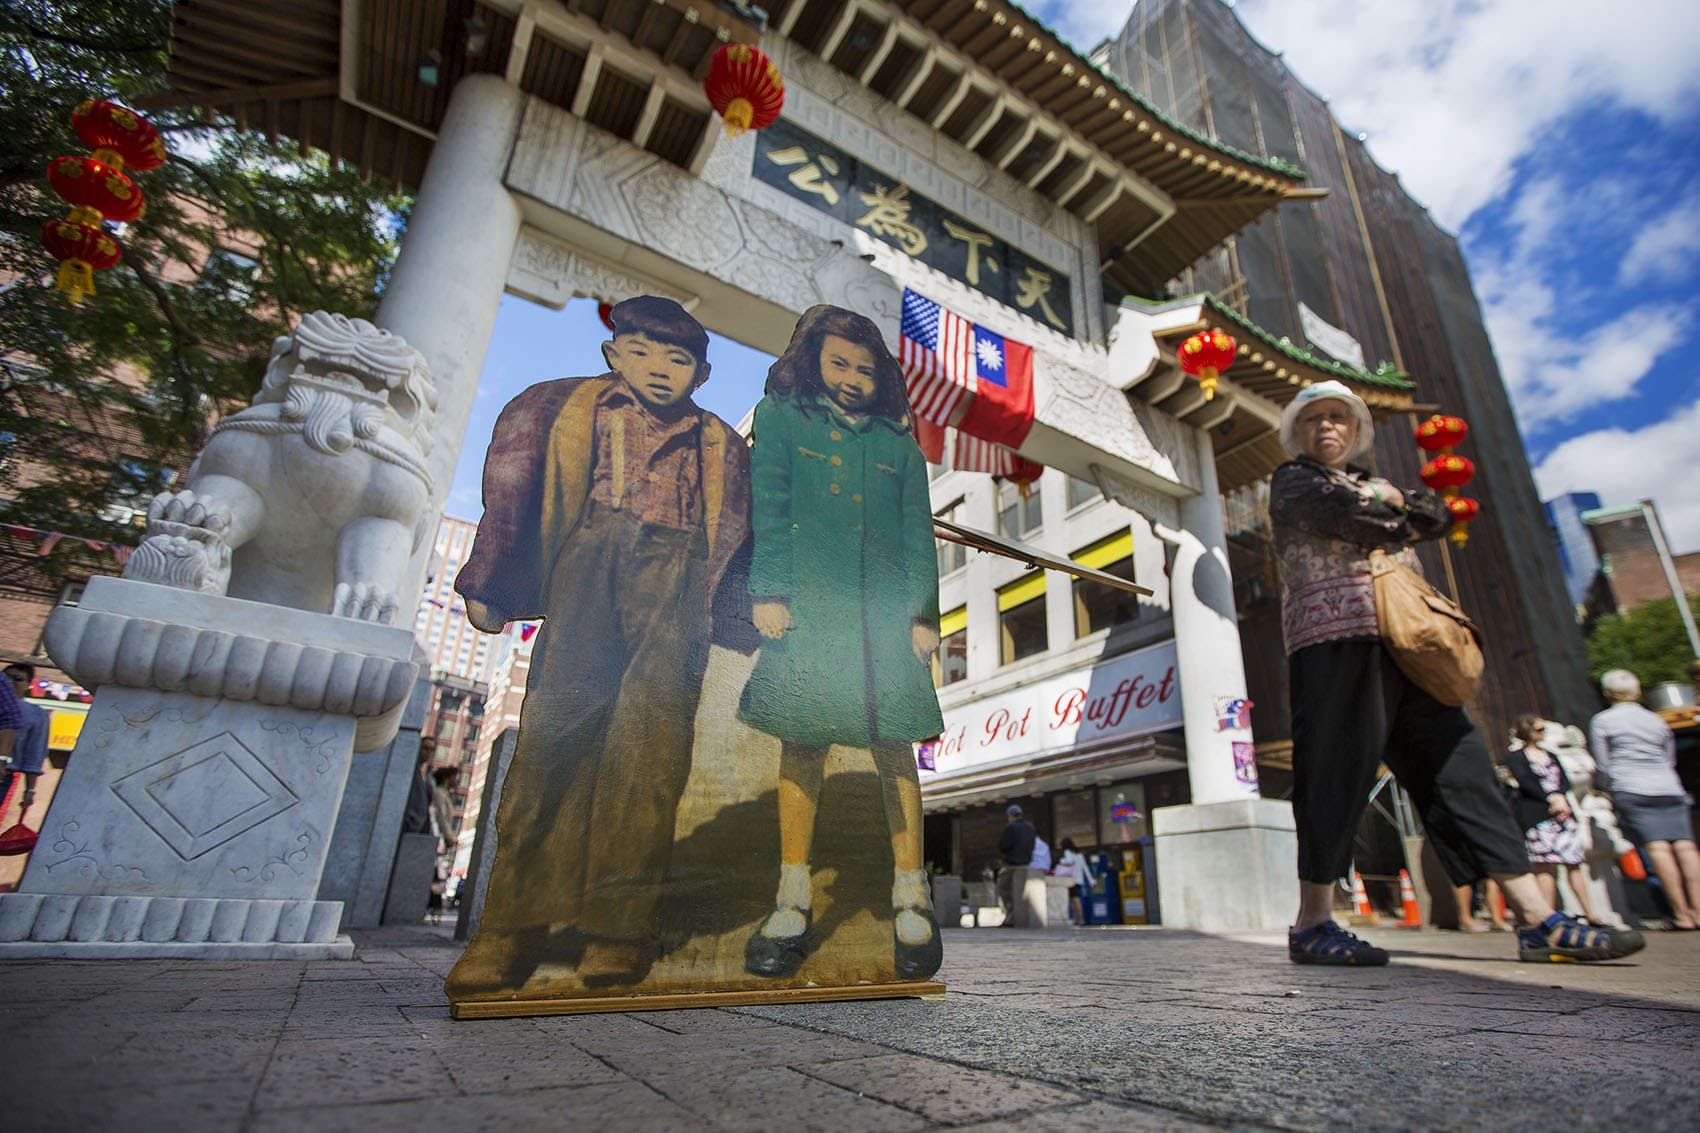 &quot;Two Kids&quot; stand at the Chinatown Gate as part of artist Wen-Ti Tsen's &quot;Home Town&quot; installation. (Jesse Costa/WBUR)